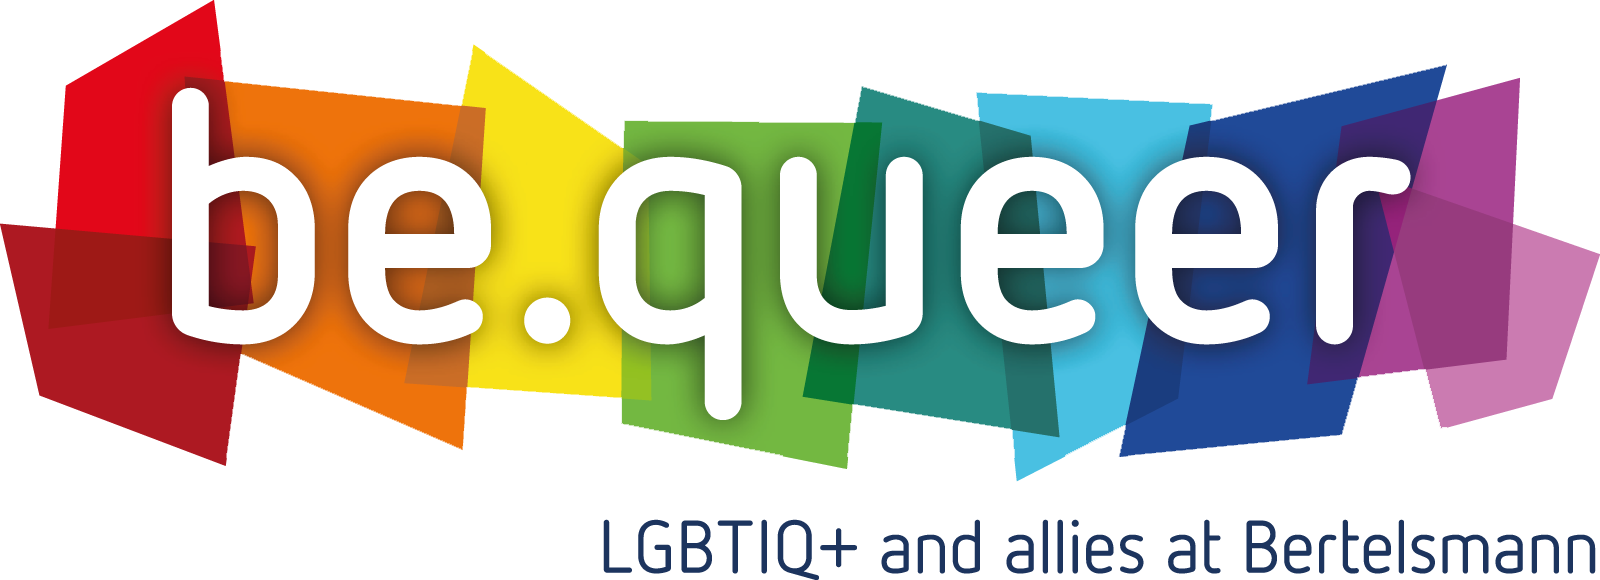 be.queer - LGBTIG and allies at Bertelsmann